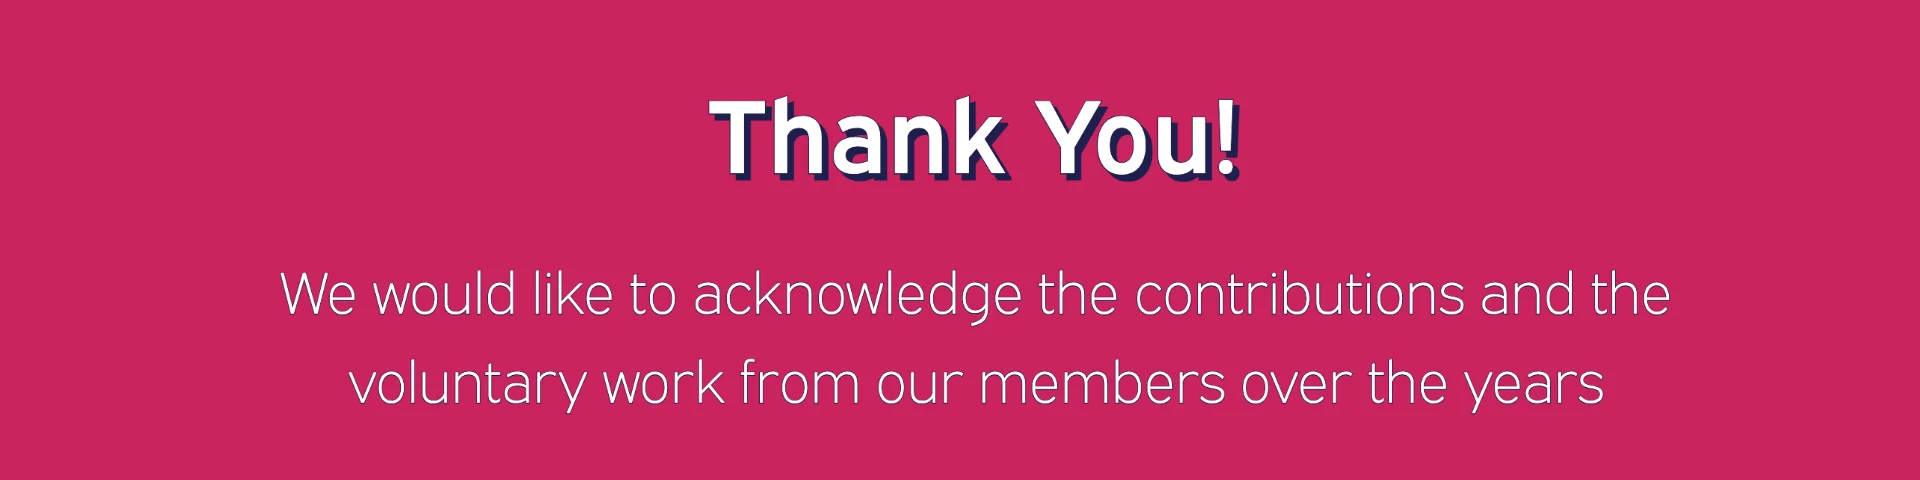 We would like to acknowledge the contributions and the voluntary work from our members over the years 